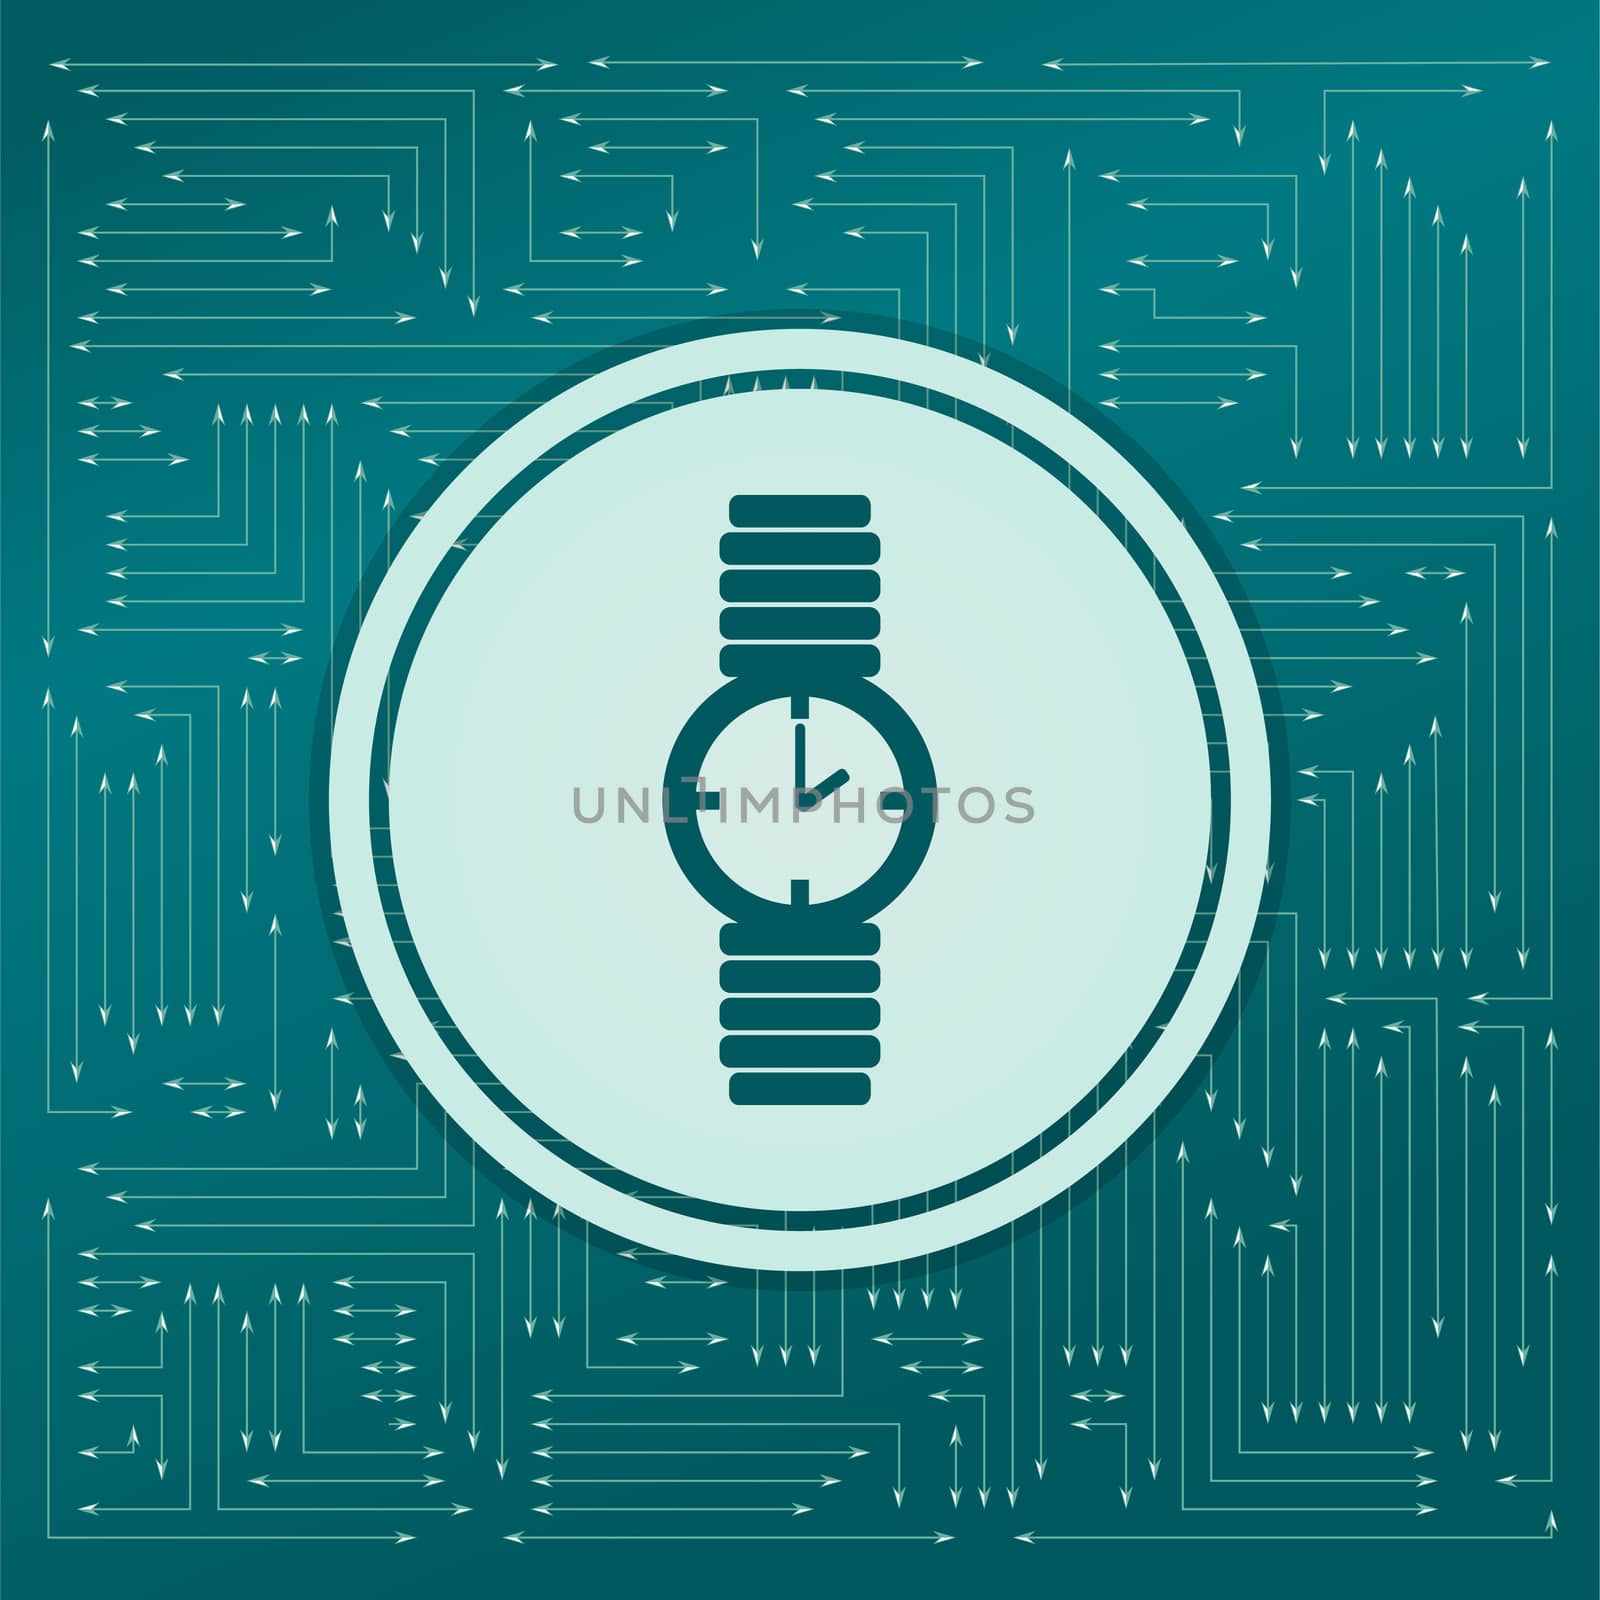 watch icon on a green background, with arrows in different directions. It appears on the electronic board. illustration